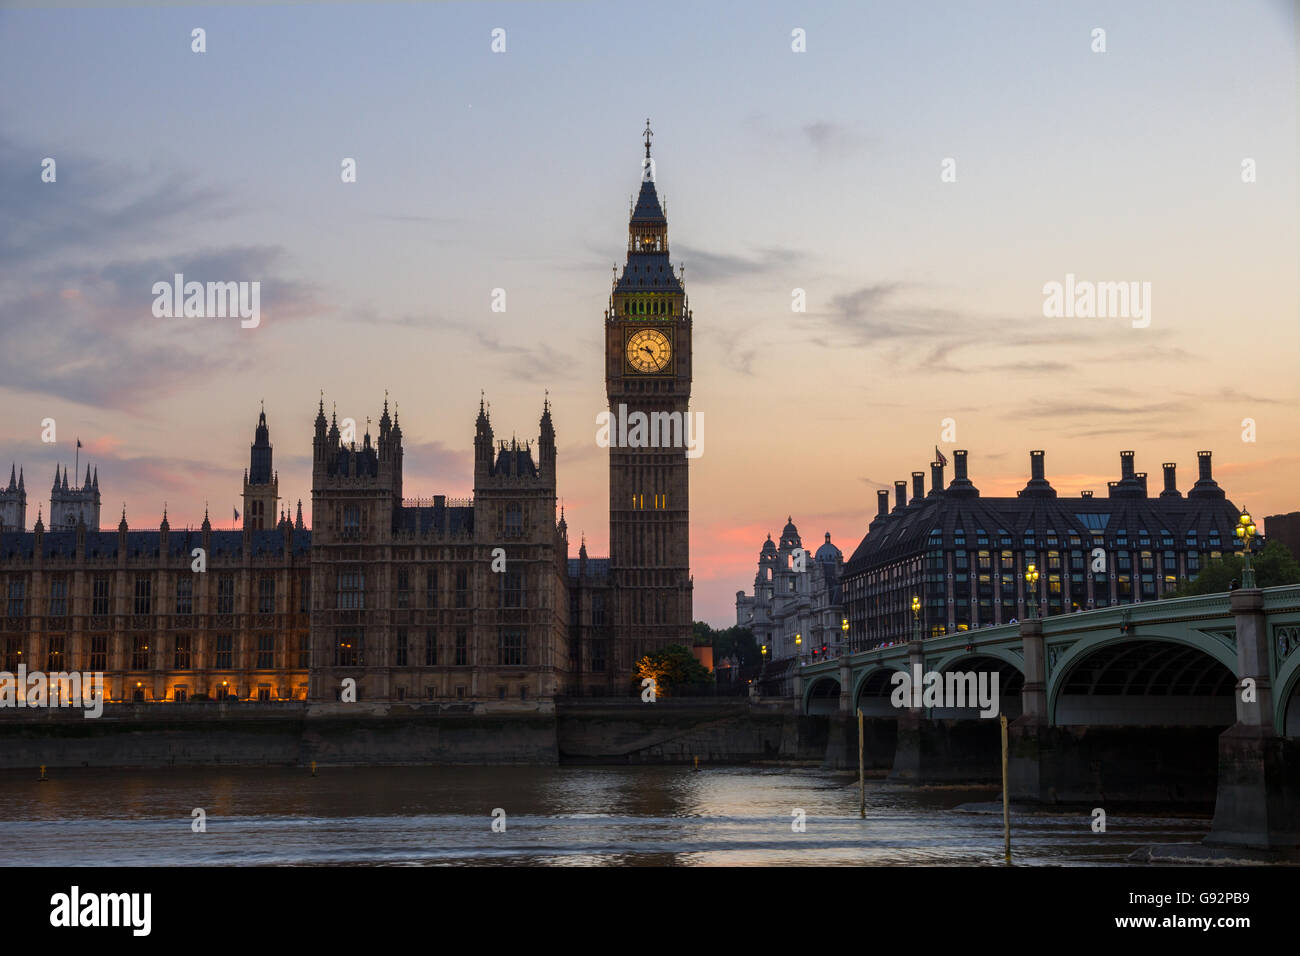 View on the Big Ben and the Palace of Westminster in London at sunset Stock Photo